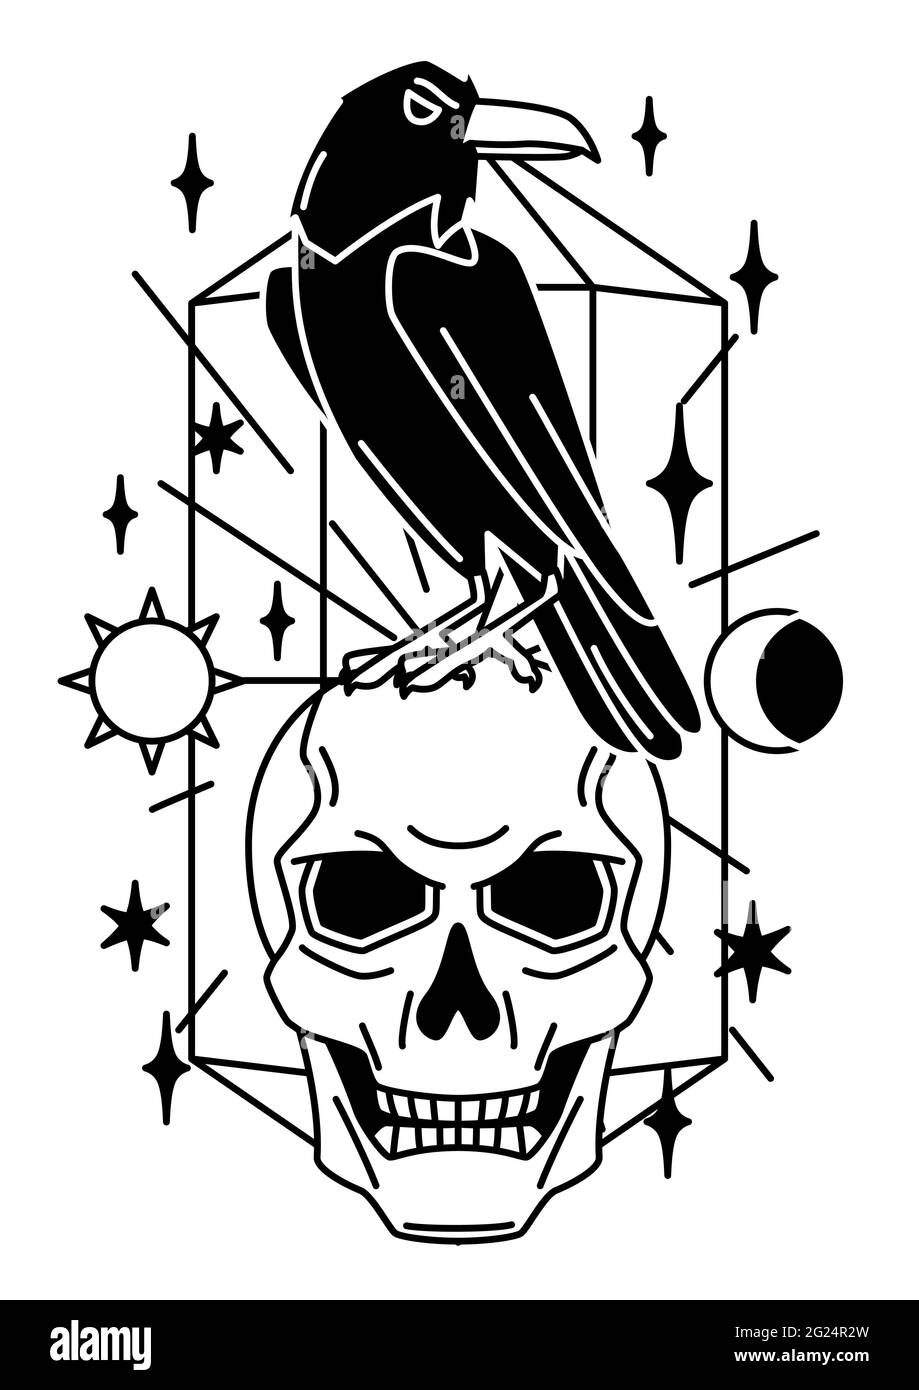 Magic illustration with raven and skull. Mystic, alchemy, spirituality and tattoo art. Stock Vector